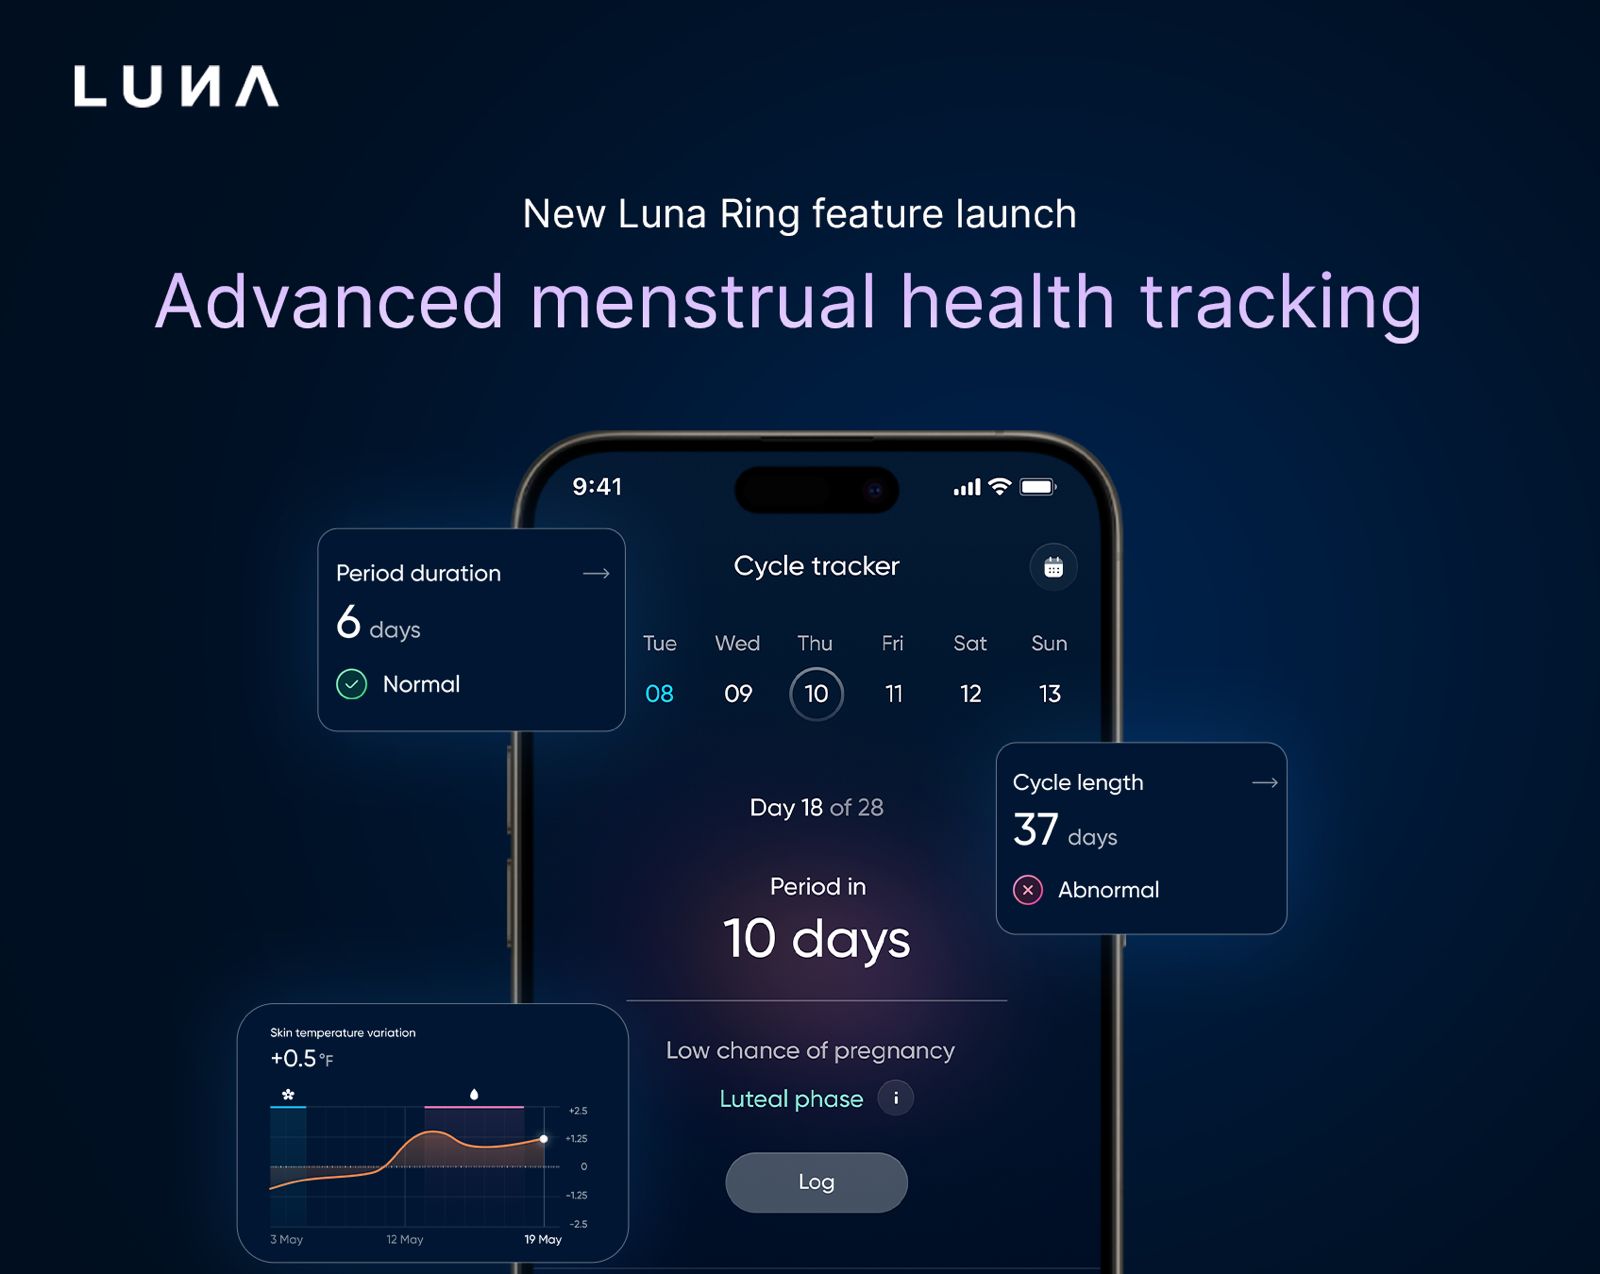 Noise Personalized Menstrual Health Tracking Features now on its Flagship Luna Ring